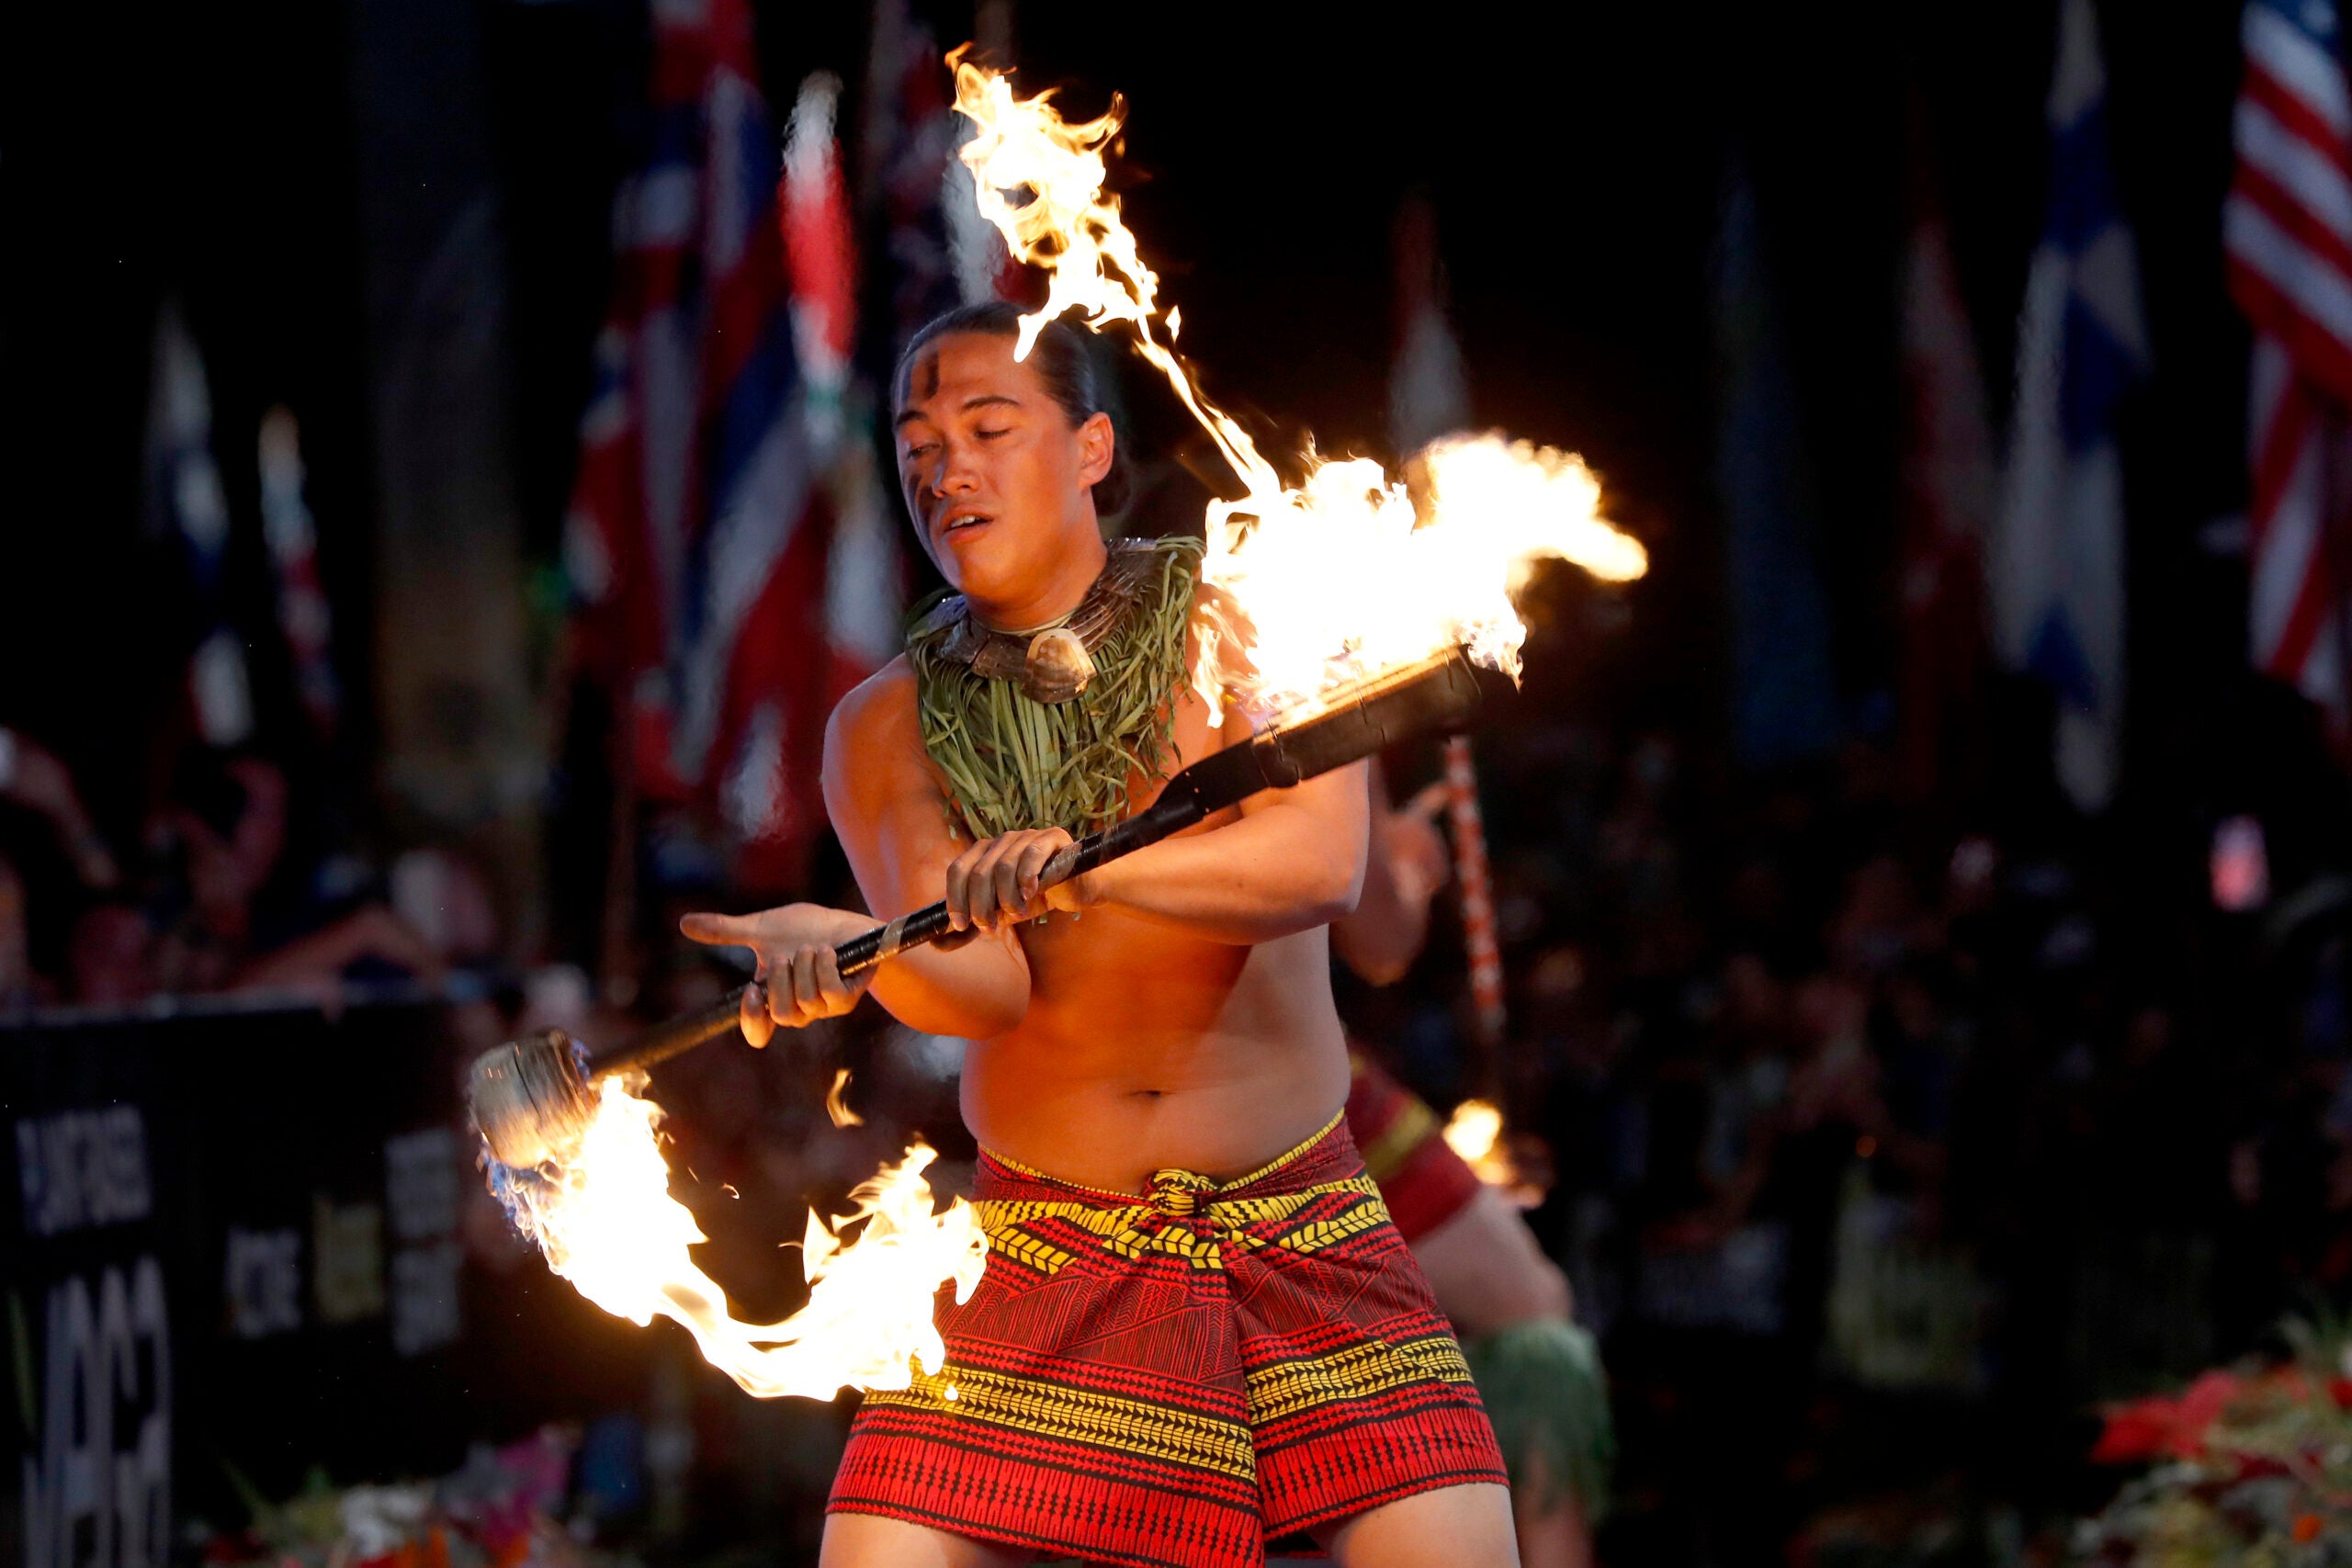 Hawaii fire dancers perform after the Ironman World Championships on October 12, 2019 in Kailua Kona, Hawaii. 